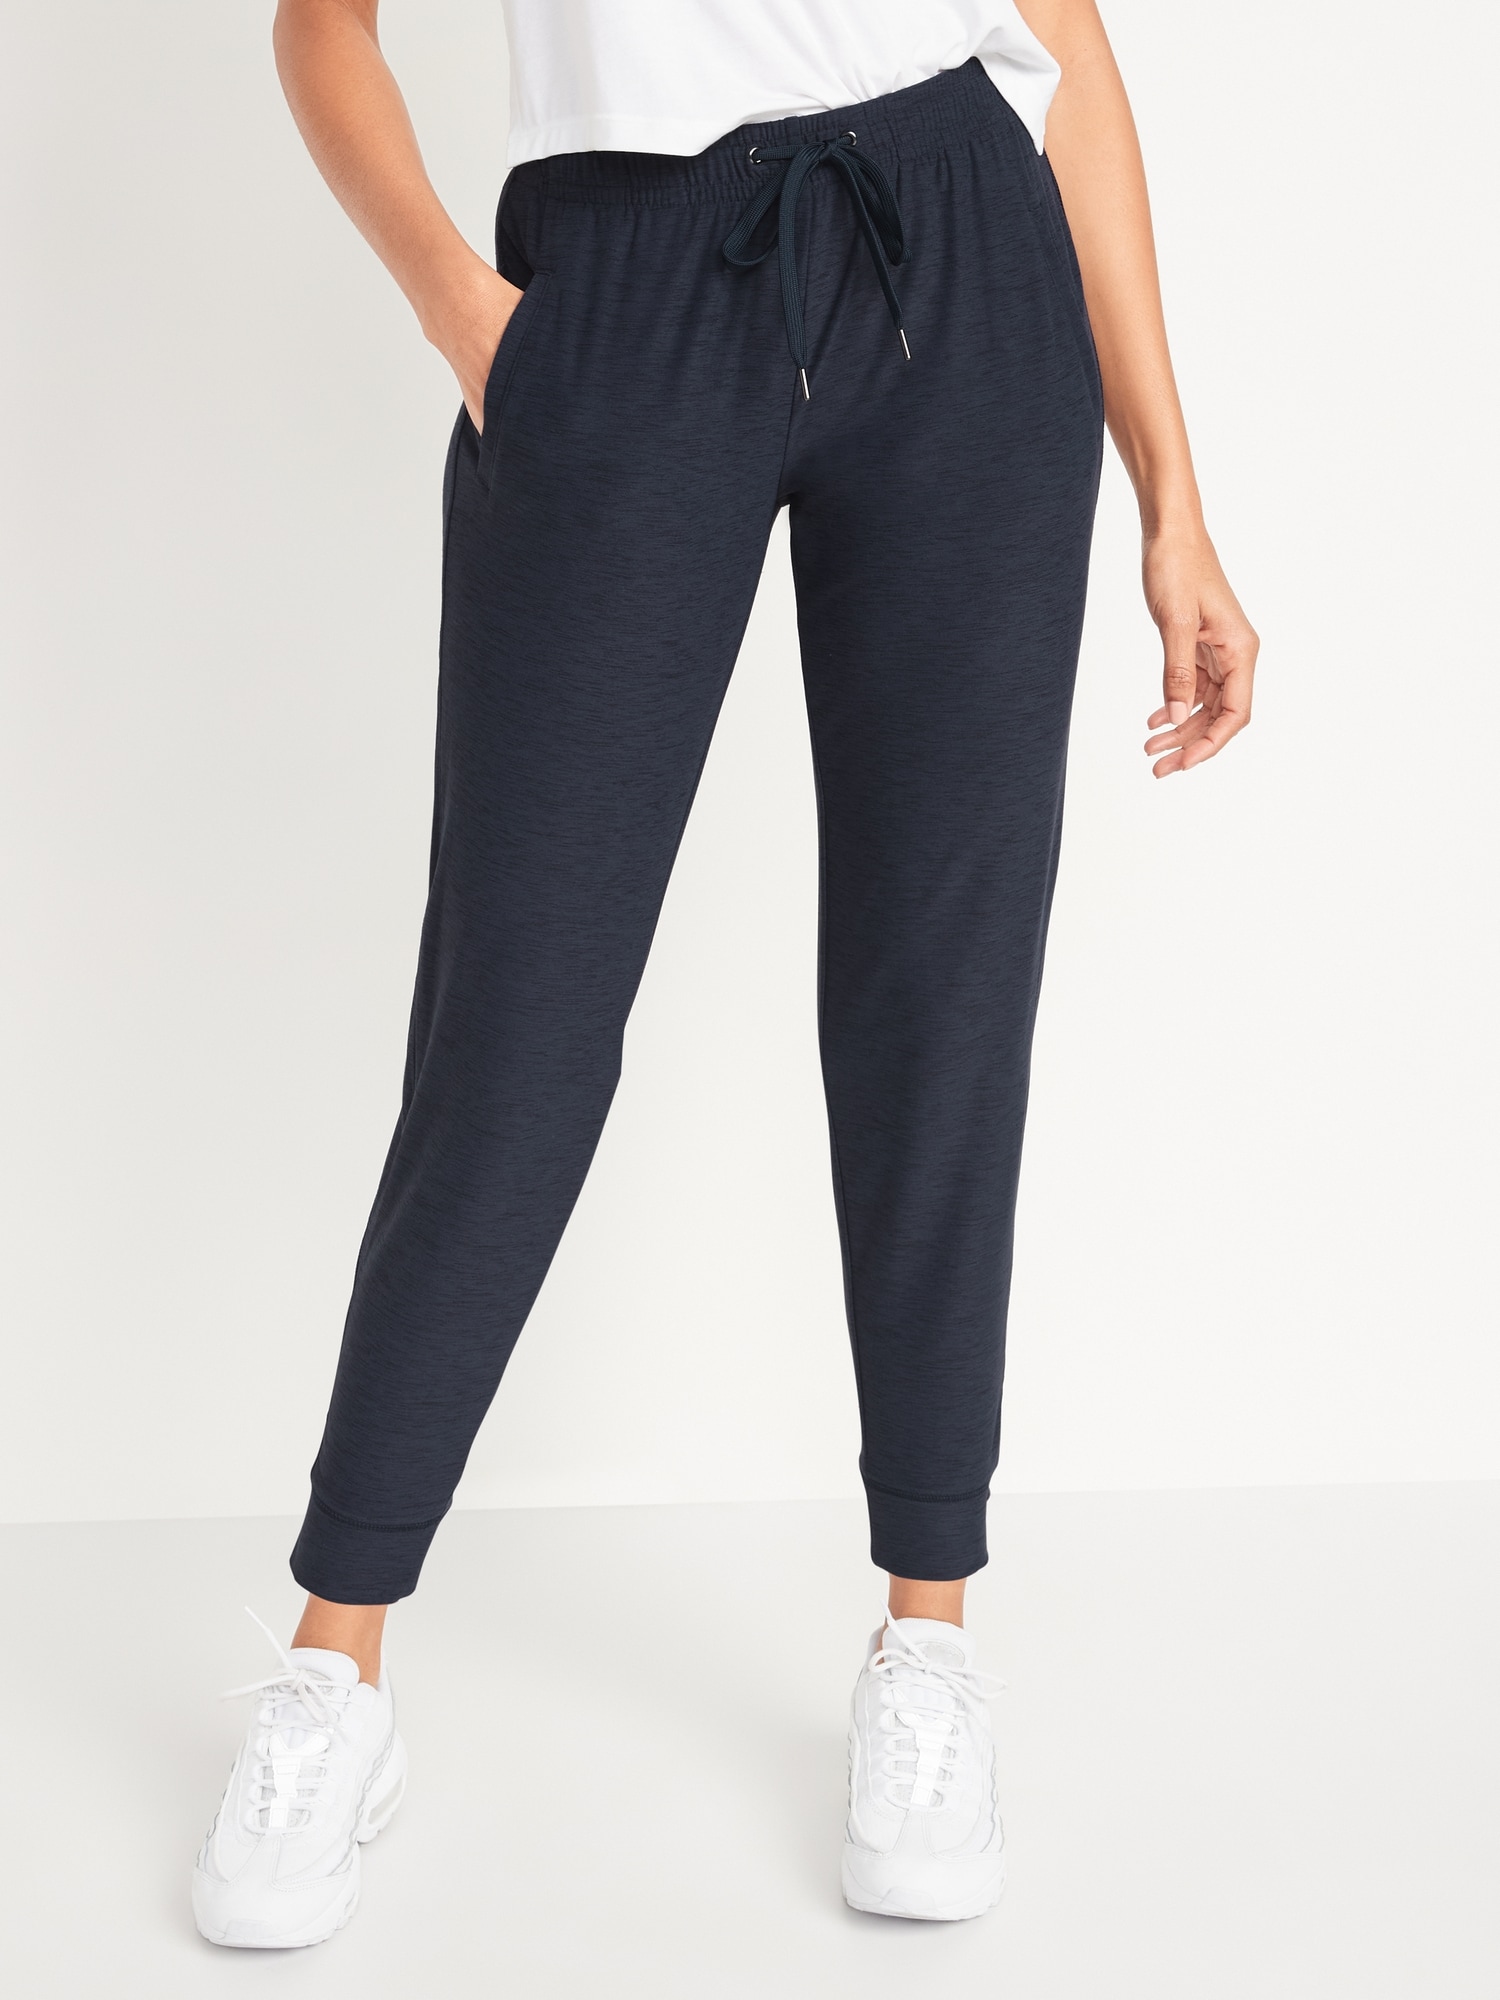 Mid-Rise Breathe ON Jogger Pants for Women | Old Navy